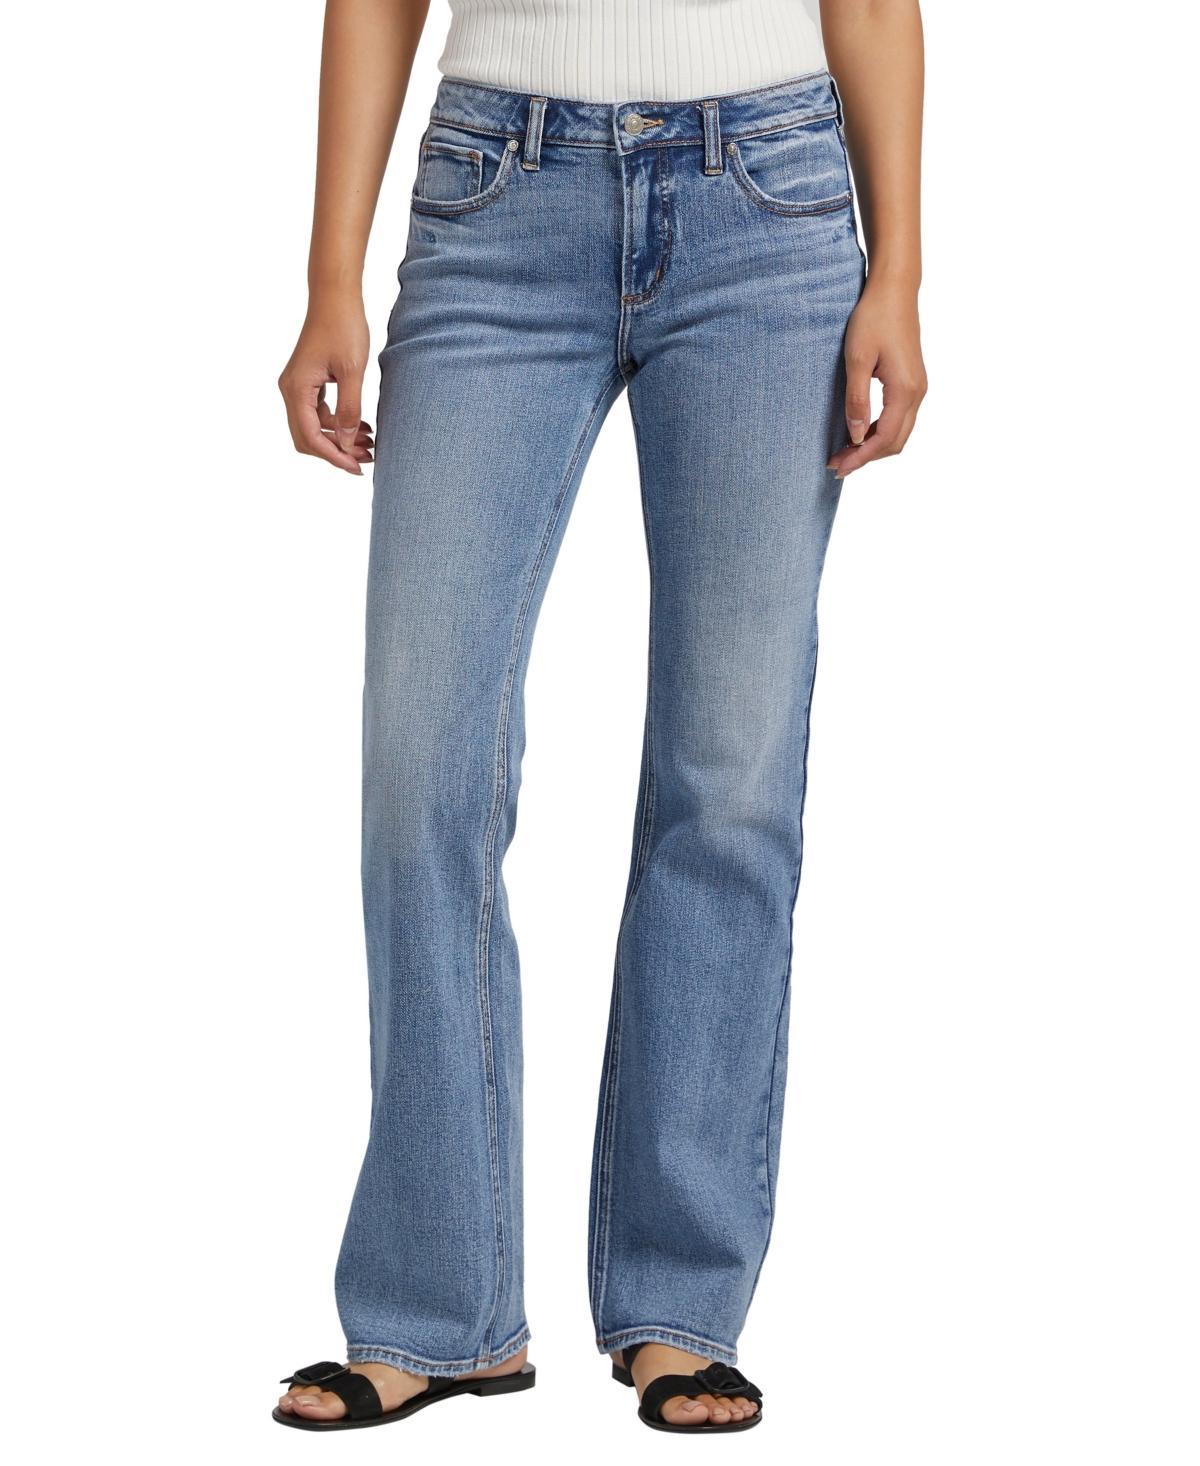 Silver Jeans Co. Be Low Slim Bootcut Jeans Product Image